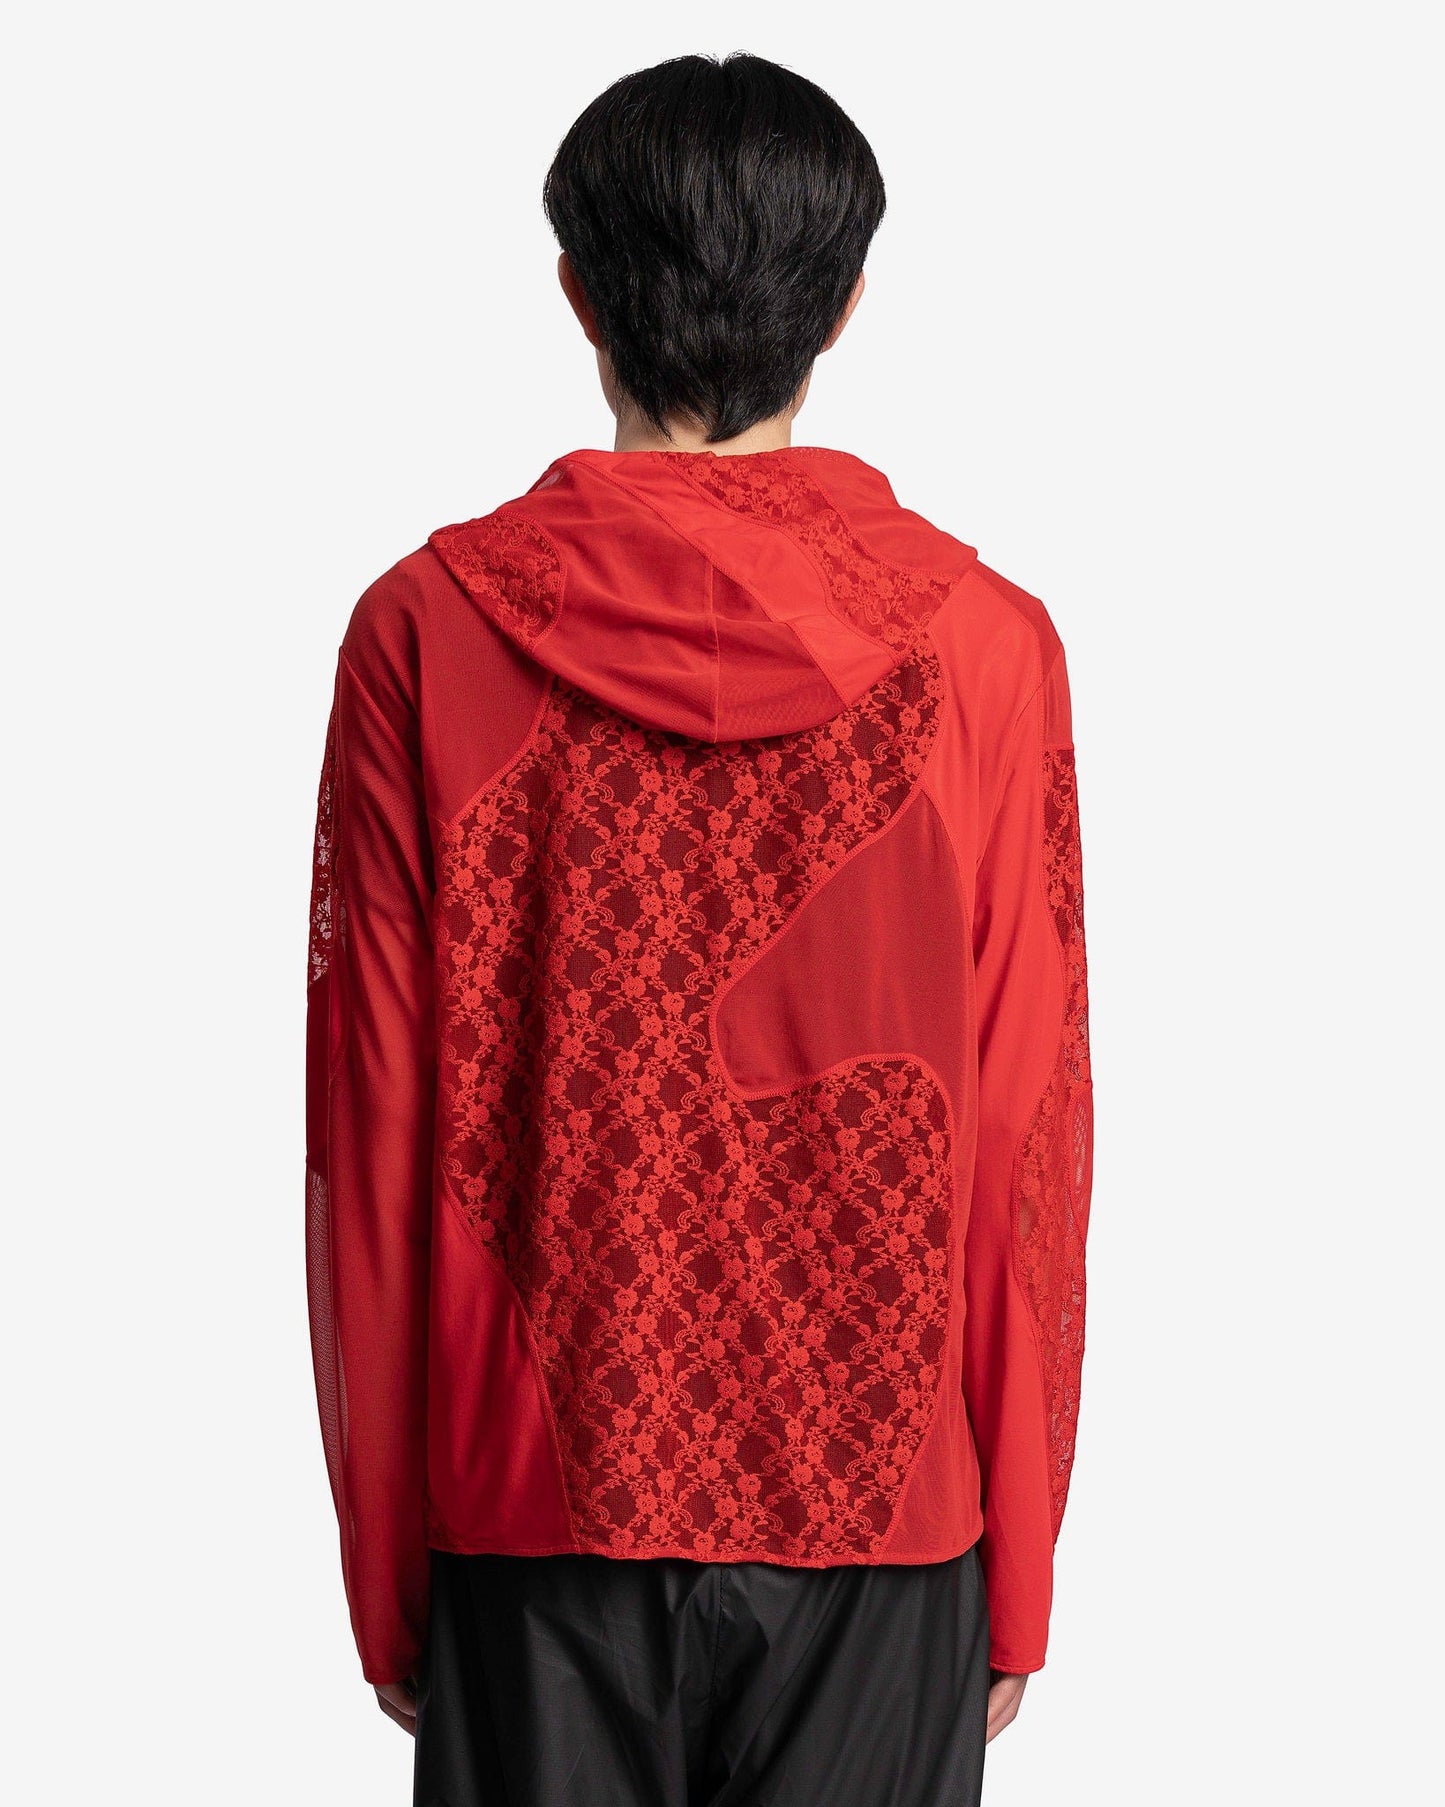 POST ARCHIVE FACTION (P.A.F) Men's Sweatshirts 5.0+ Hoodie Left in Red